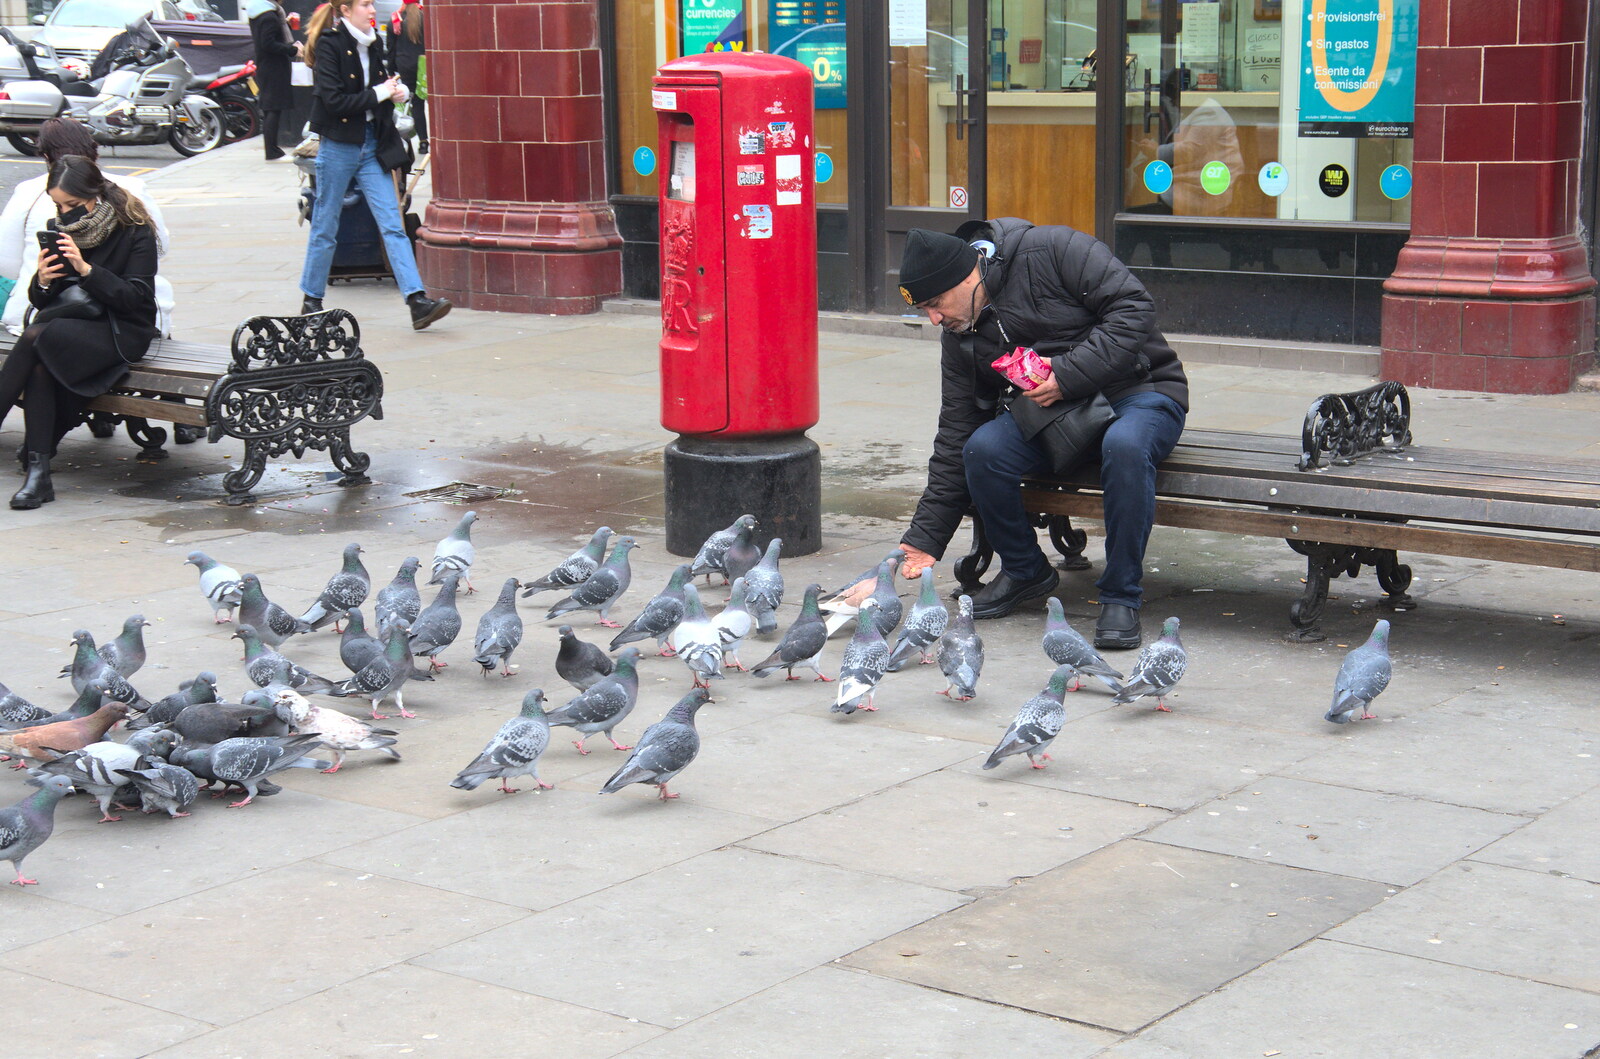 Some dude feeds the pigeons from A Trip to the Natural History Museum, Kensington, London - 15th January 2022